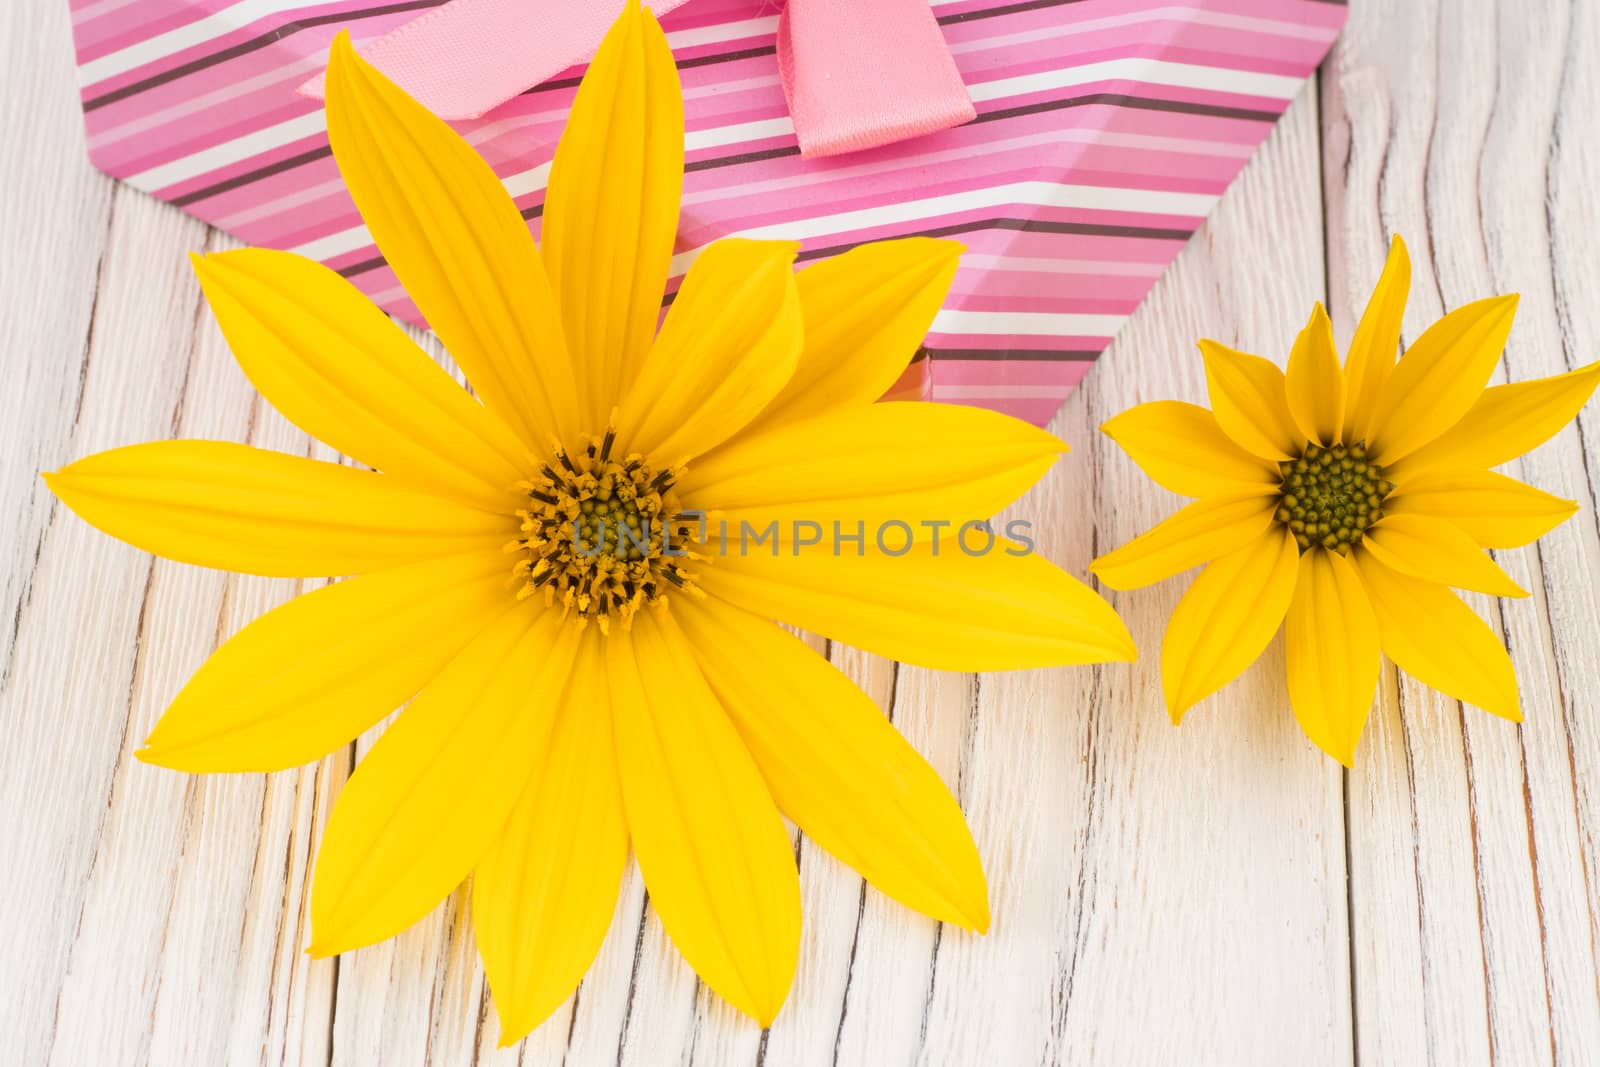 Wild flowers in a watering can with a gift box on a wooden table. Selective focus.